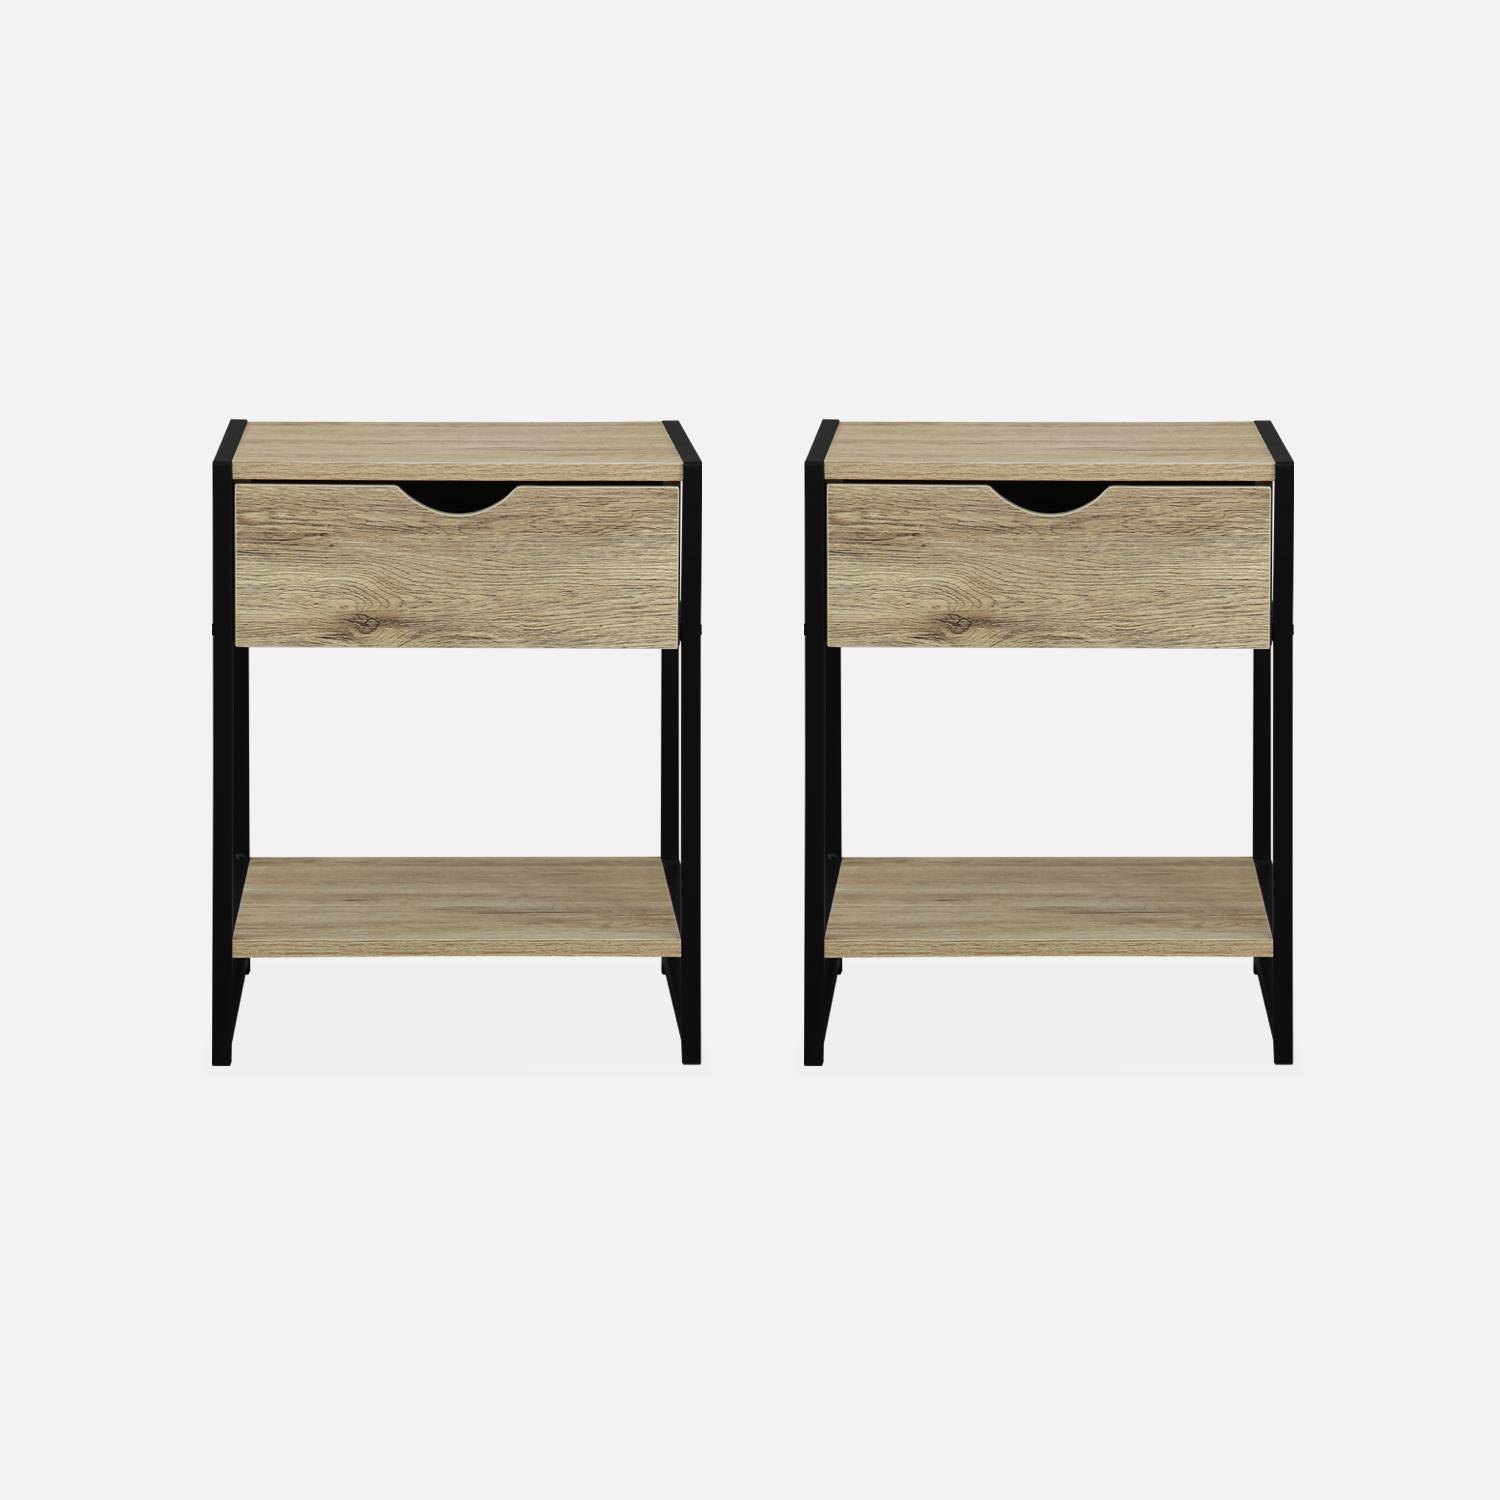 Pair of metal and wood-effect bedside tables with drawer and shelf, 40x40x50cm - Loft Photo5